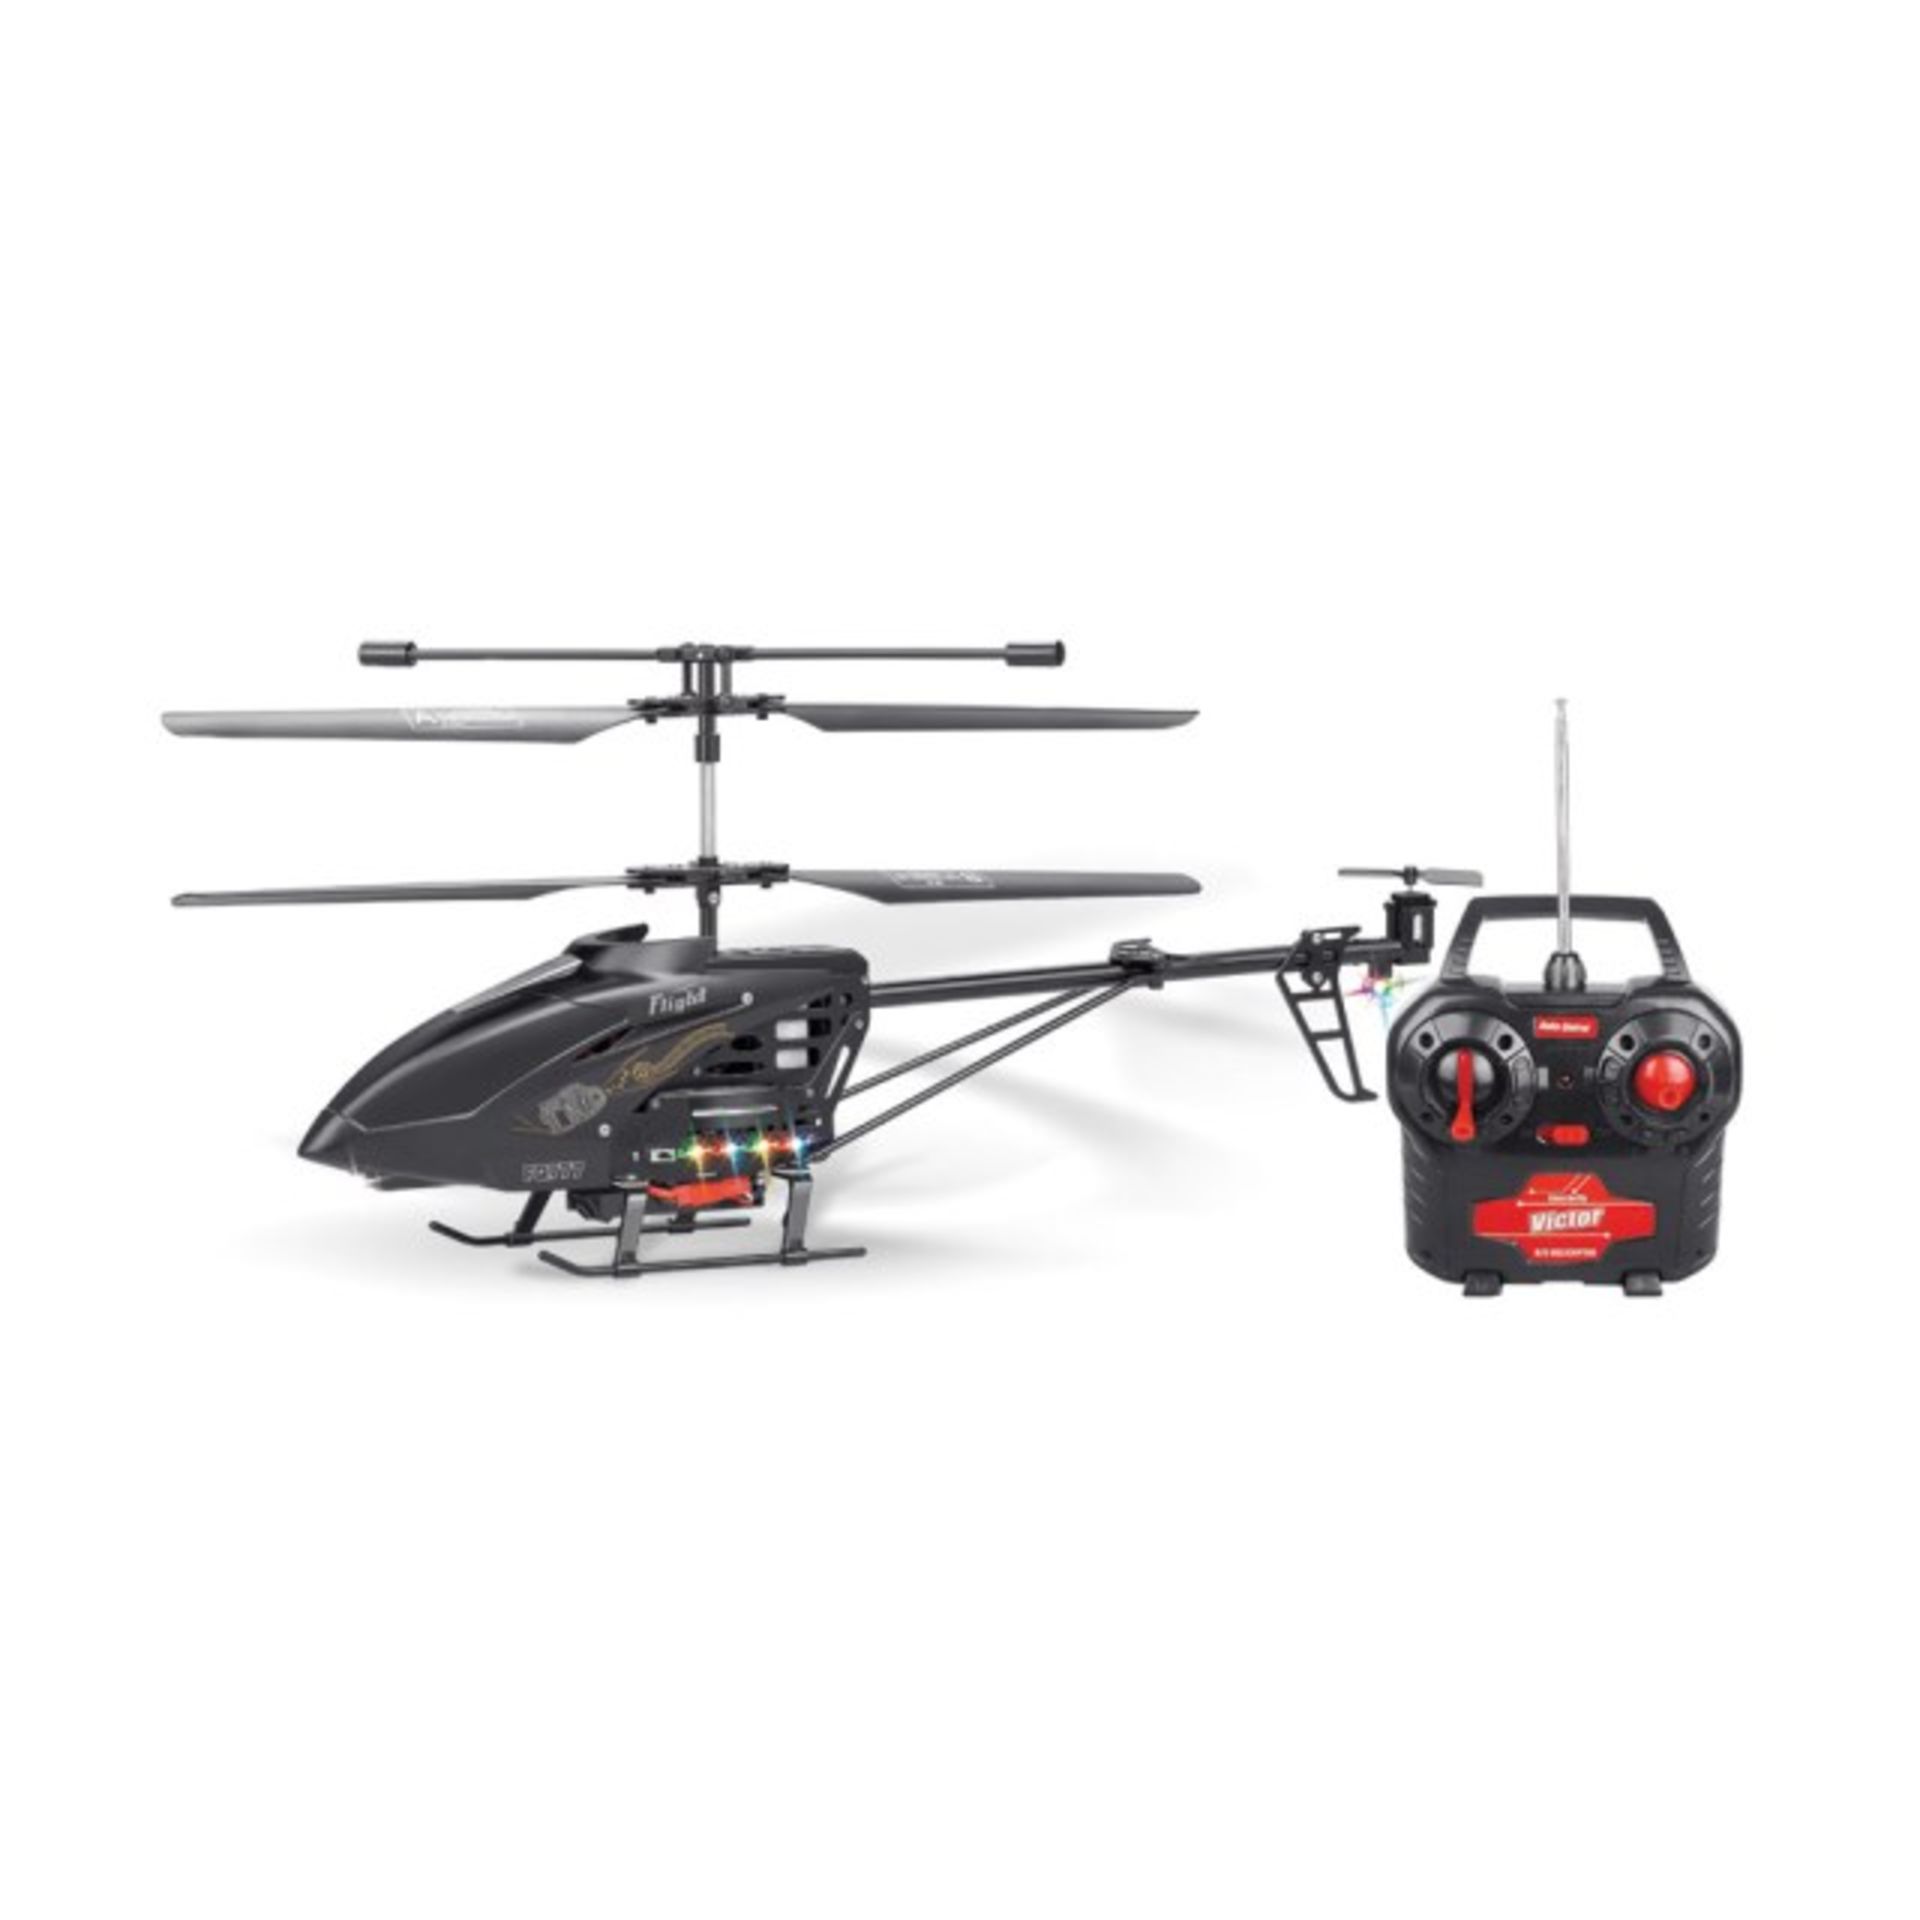 V Shadow Hawk Spy Helicopter With Built In Micro Photo & Video Camera - Lights-Includes SD Card To